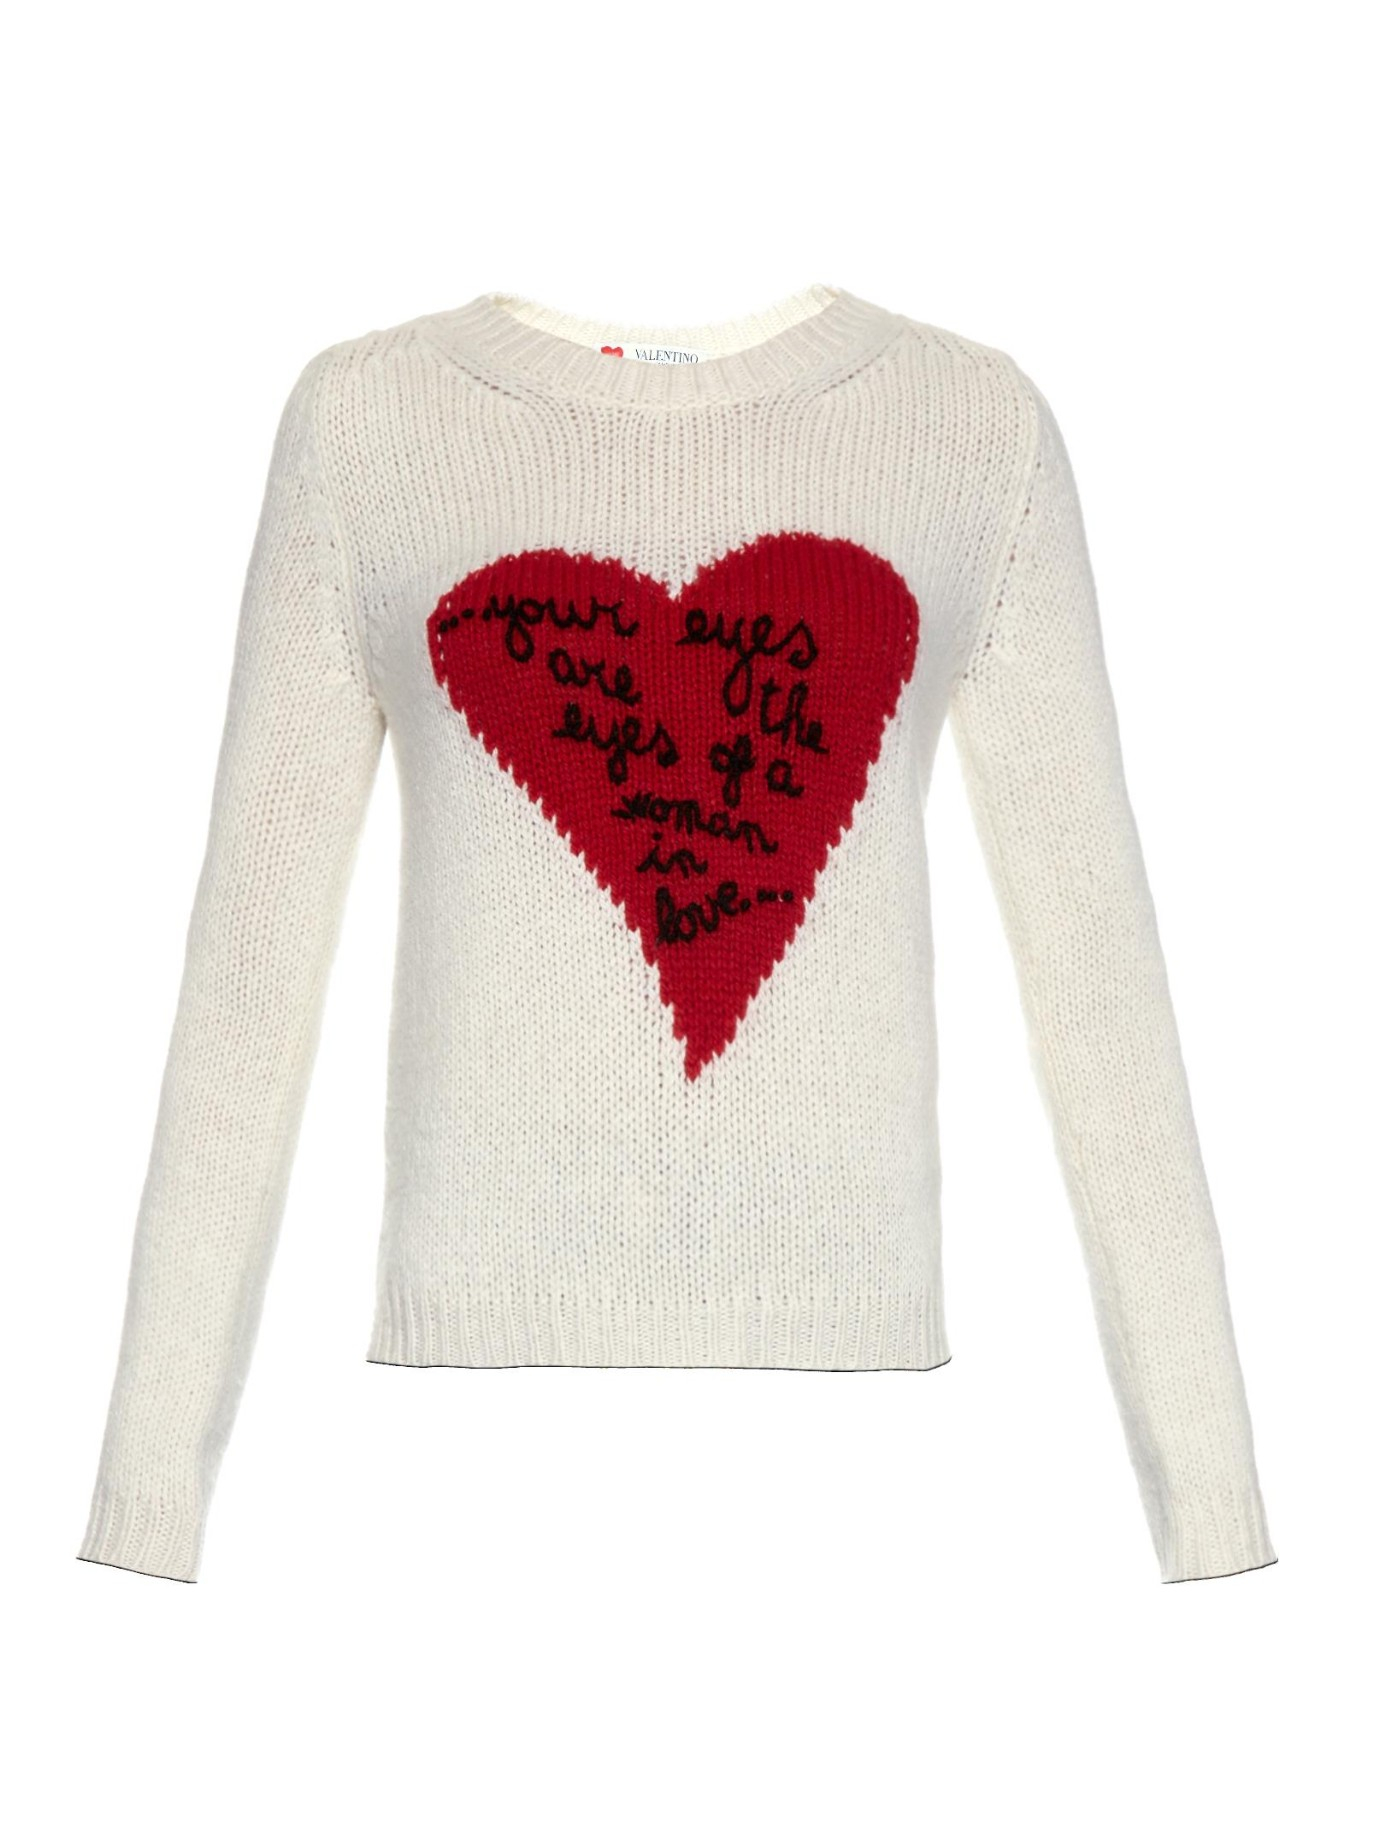 Valentino Heart-intarsia Cashmere Sweater in Ivory/Red (White) - Lyst